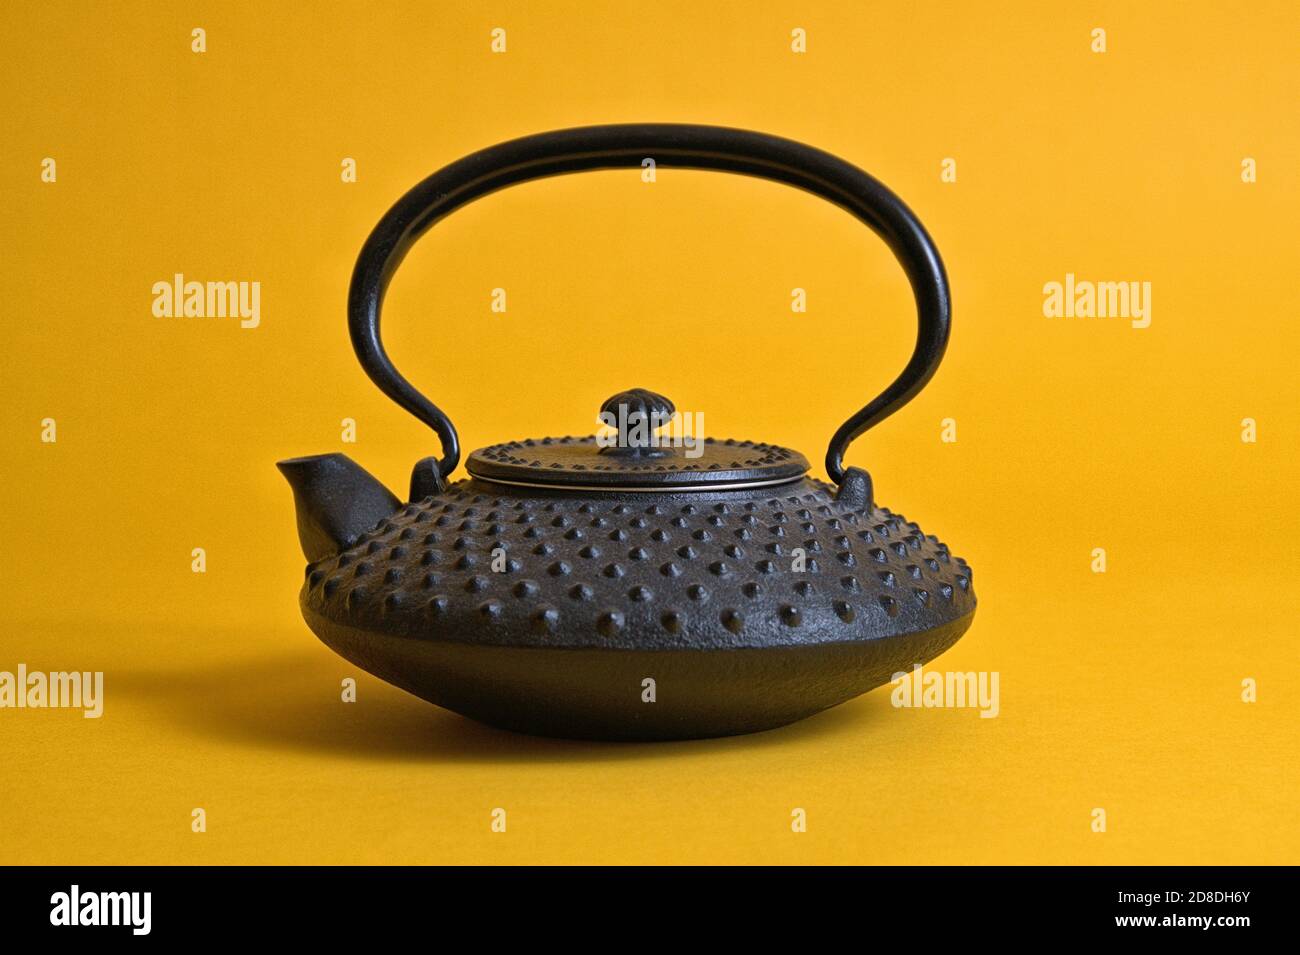 https://c8.alamy.com/comp/2D8DH6Y/schleswig-deutschland-28th-oct-2020-a-small-original-iwachu-cast-iron-teapot-from-japan-with-the-so-called-hail-pattern-arare-here-in-smaller-size-chu-arare-traditionally-these-jugs-were-not-used-as-a-teapot-but-as-a-kettle-tetsubin-in-which-the-water-was-heated-today-they-are-enamelled-on-the-inside-so-that-they-can-be-used-as-a-teapot-kyusu-photo-against-a-yellow-background-usage-worldwide-credit-dpaalamy-live-news-2D8DH6Y.jpg